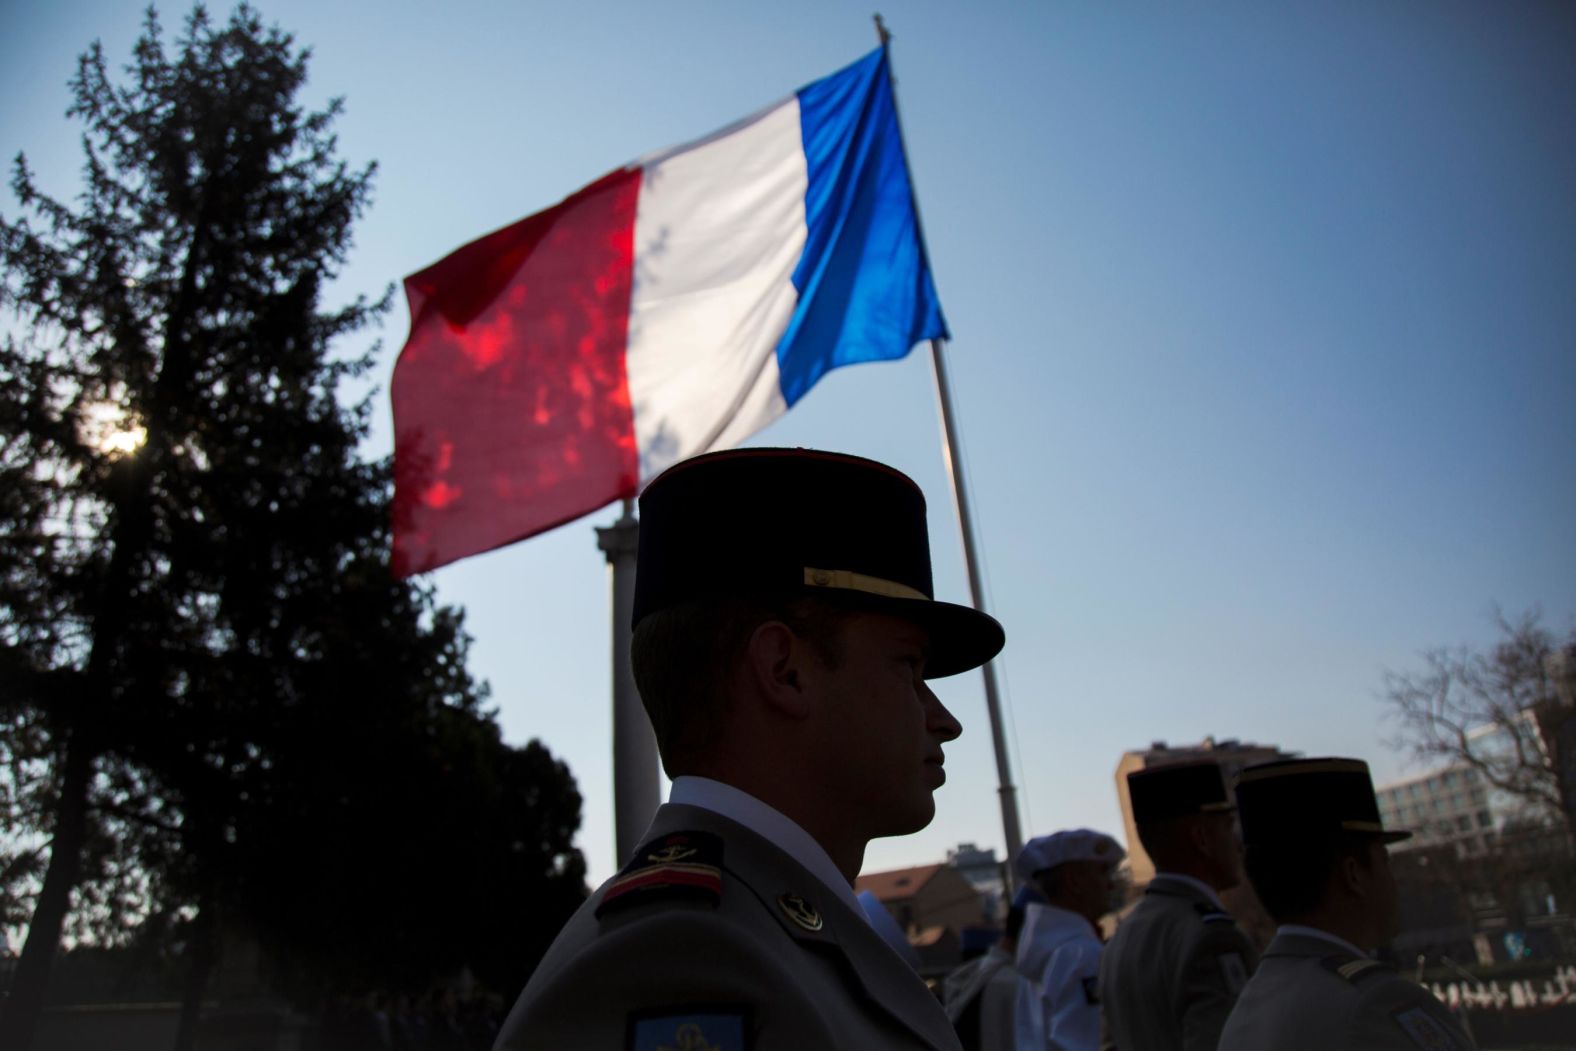 A French army officer attends a Remembrance Day ceremony at The French Soldiers Cemetery in Belgrade on Sunday.